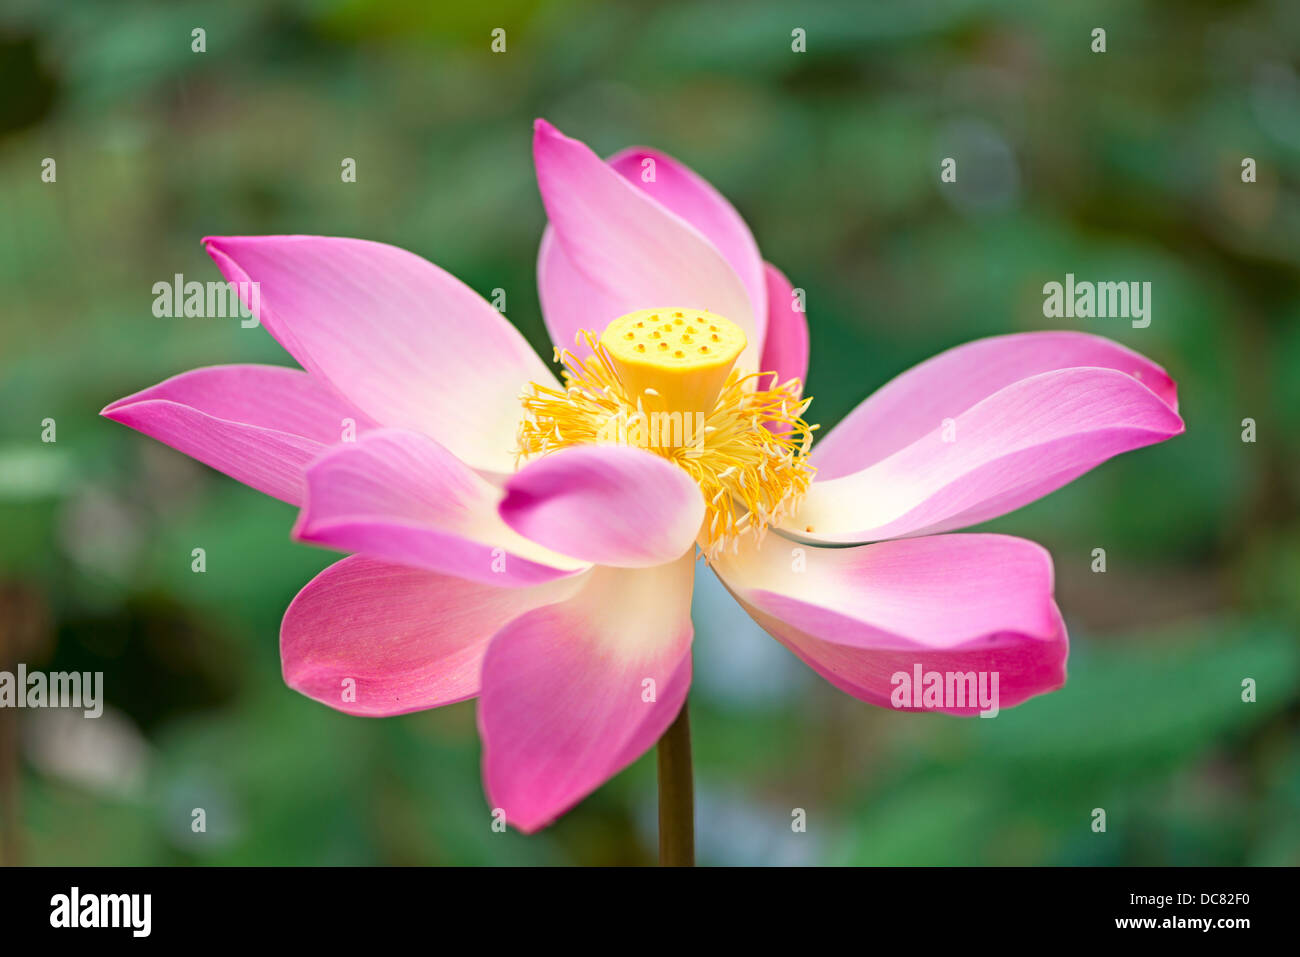 Lotus flower blossoming and lotus leaves plants in a pond Stock Photo